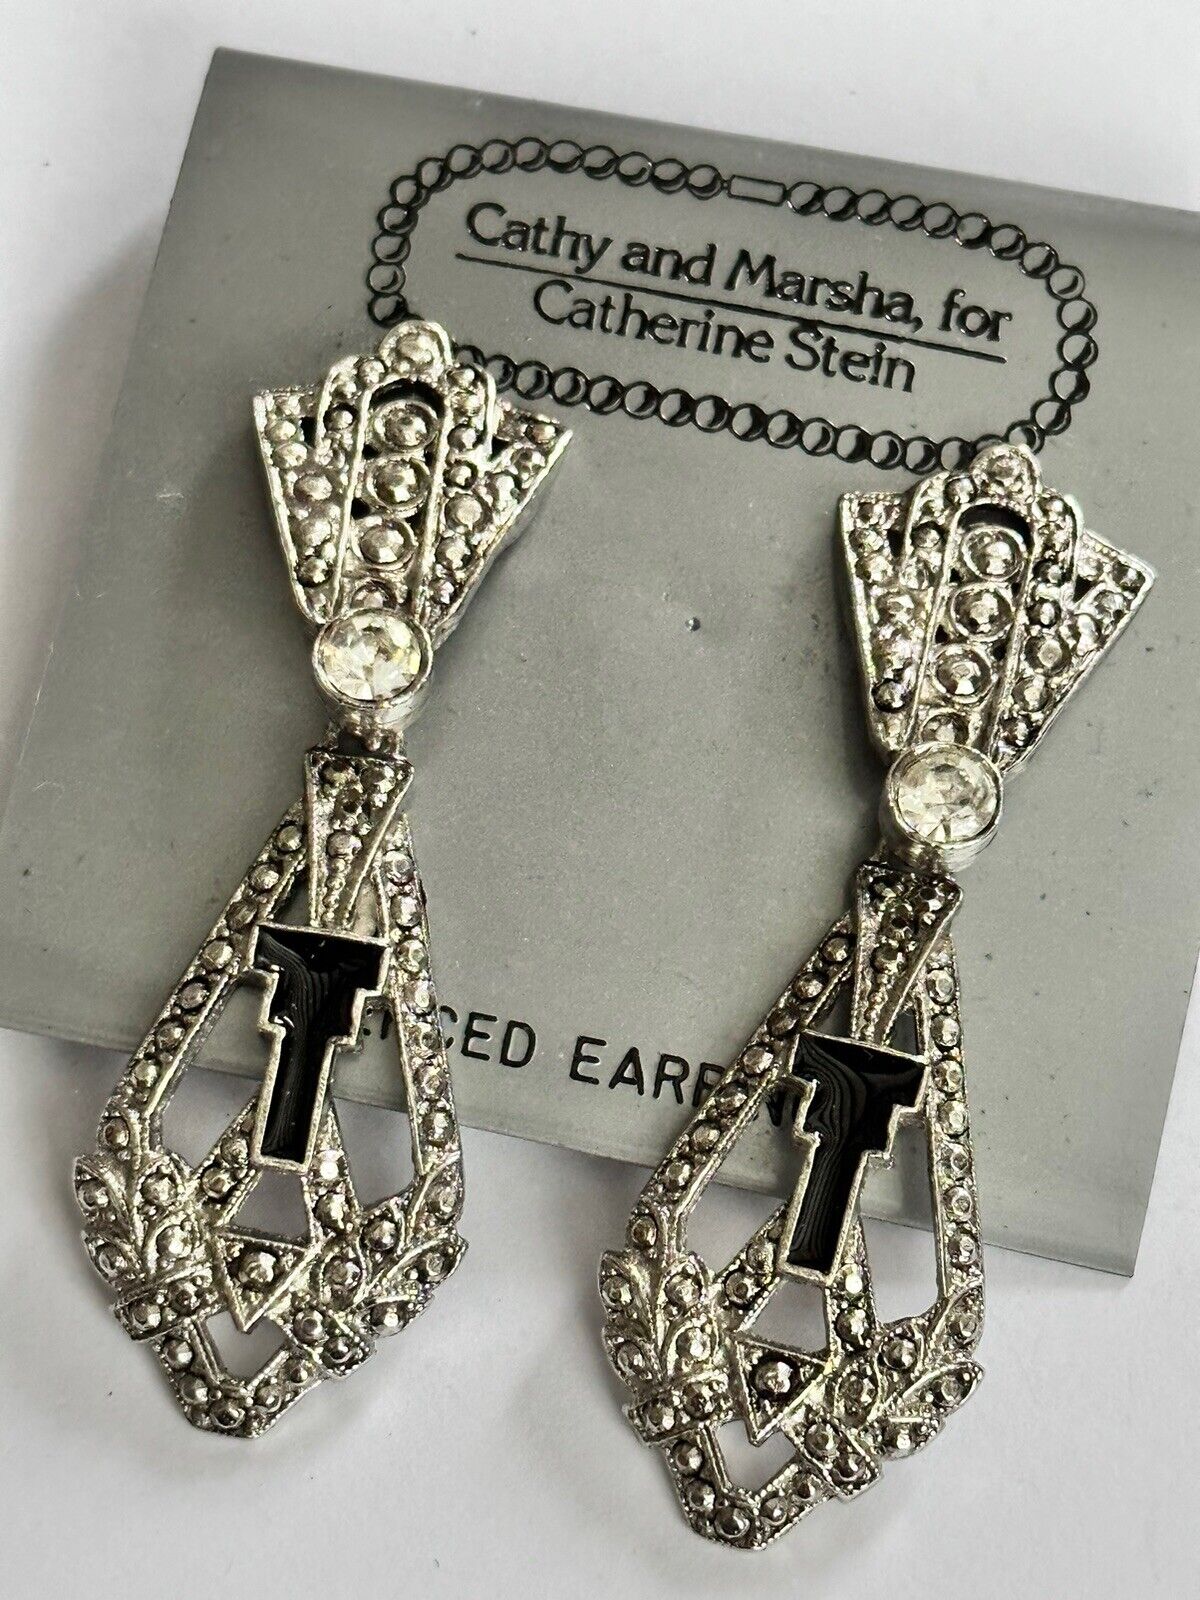 Vintage 1980s Cathy And Marsha For Catherine Stein Marcasite Style Drop Earrings